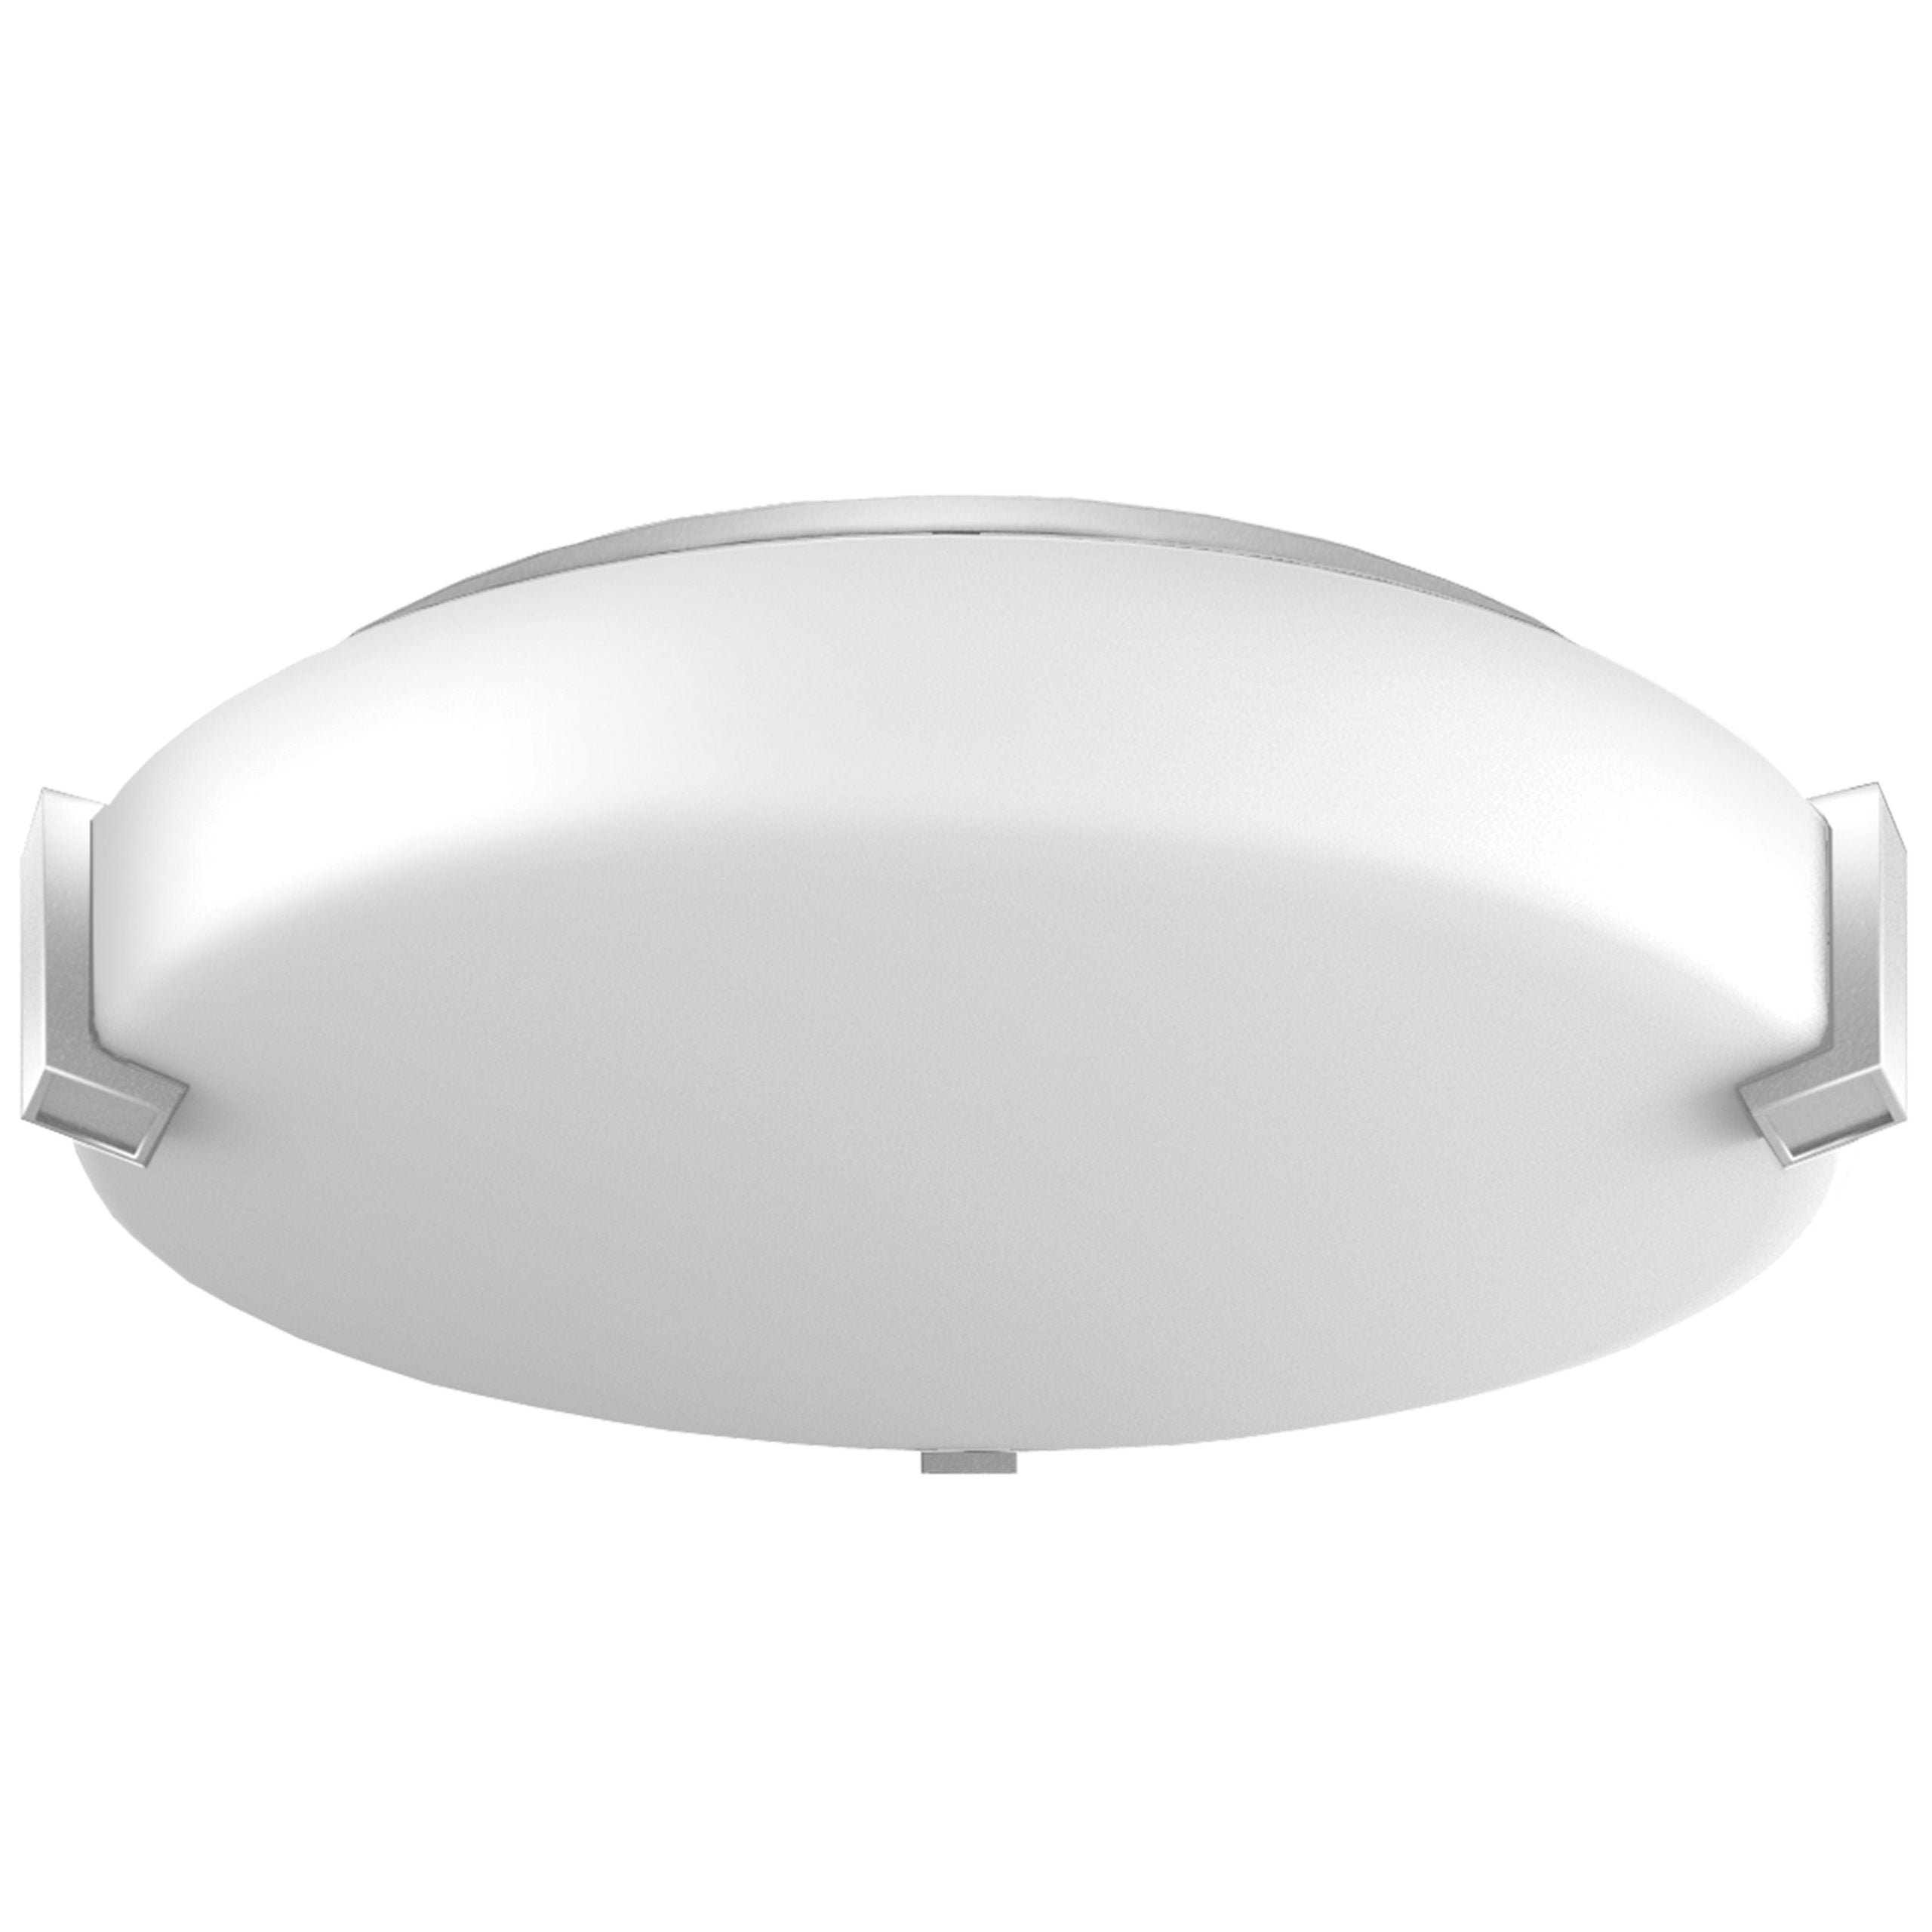 16"W Satin Nickel Ceiling Light with Frosted Acrylic Shade